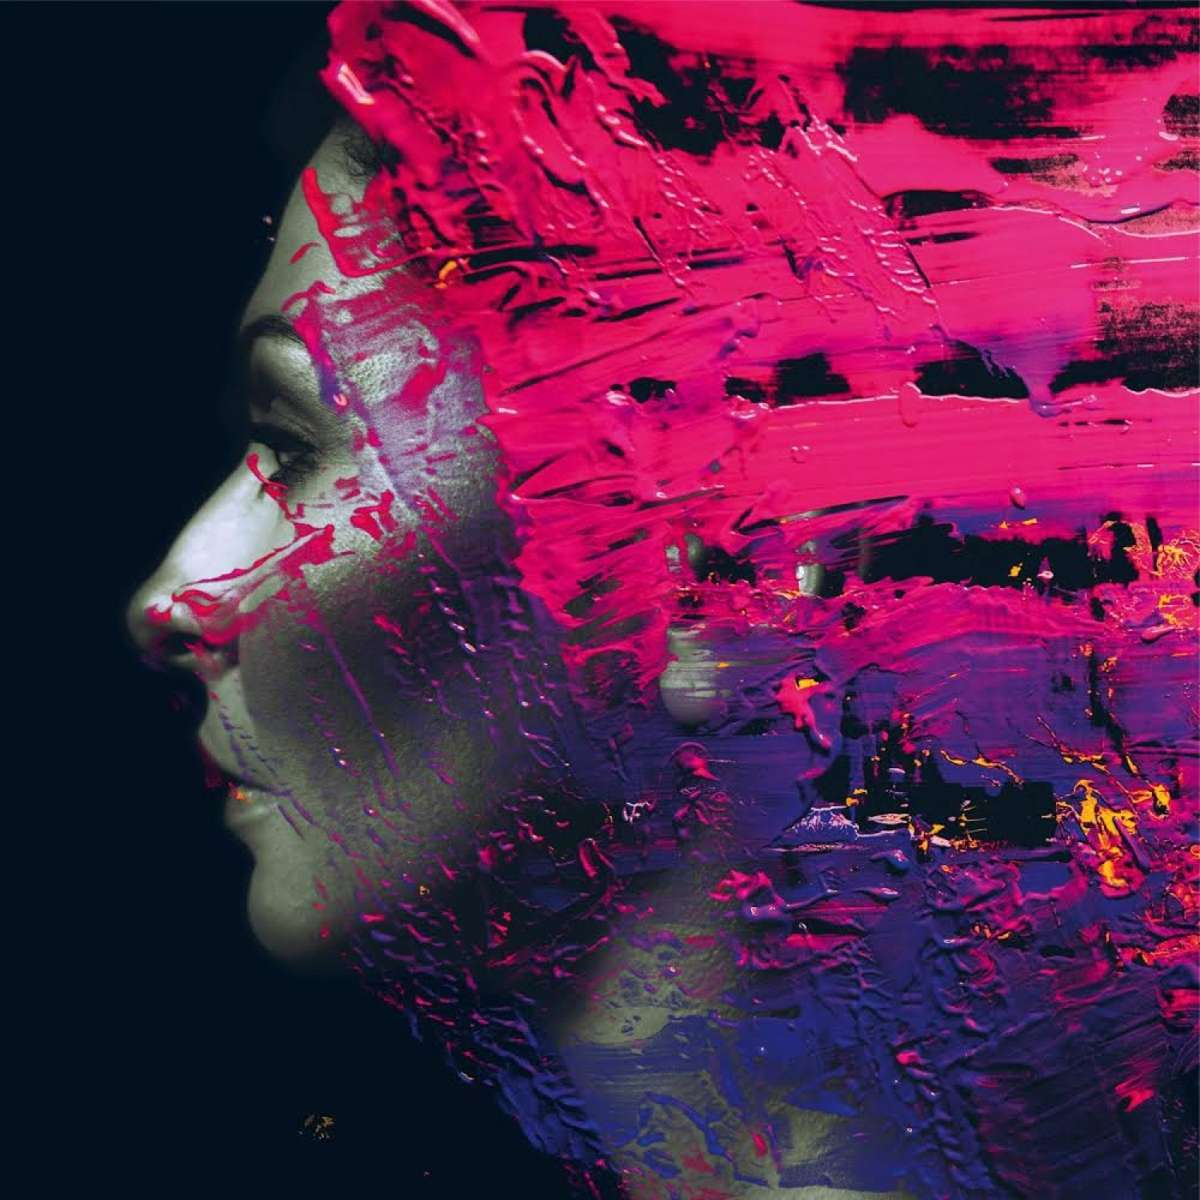 HAND. CANNOT. ERASE. - NEW EDITION